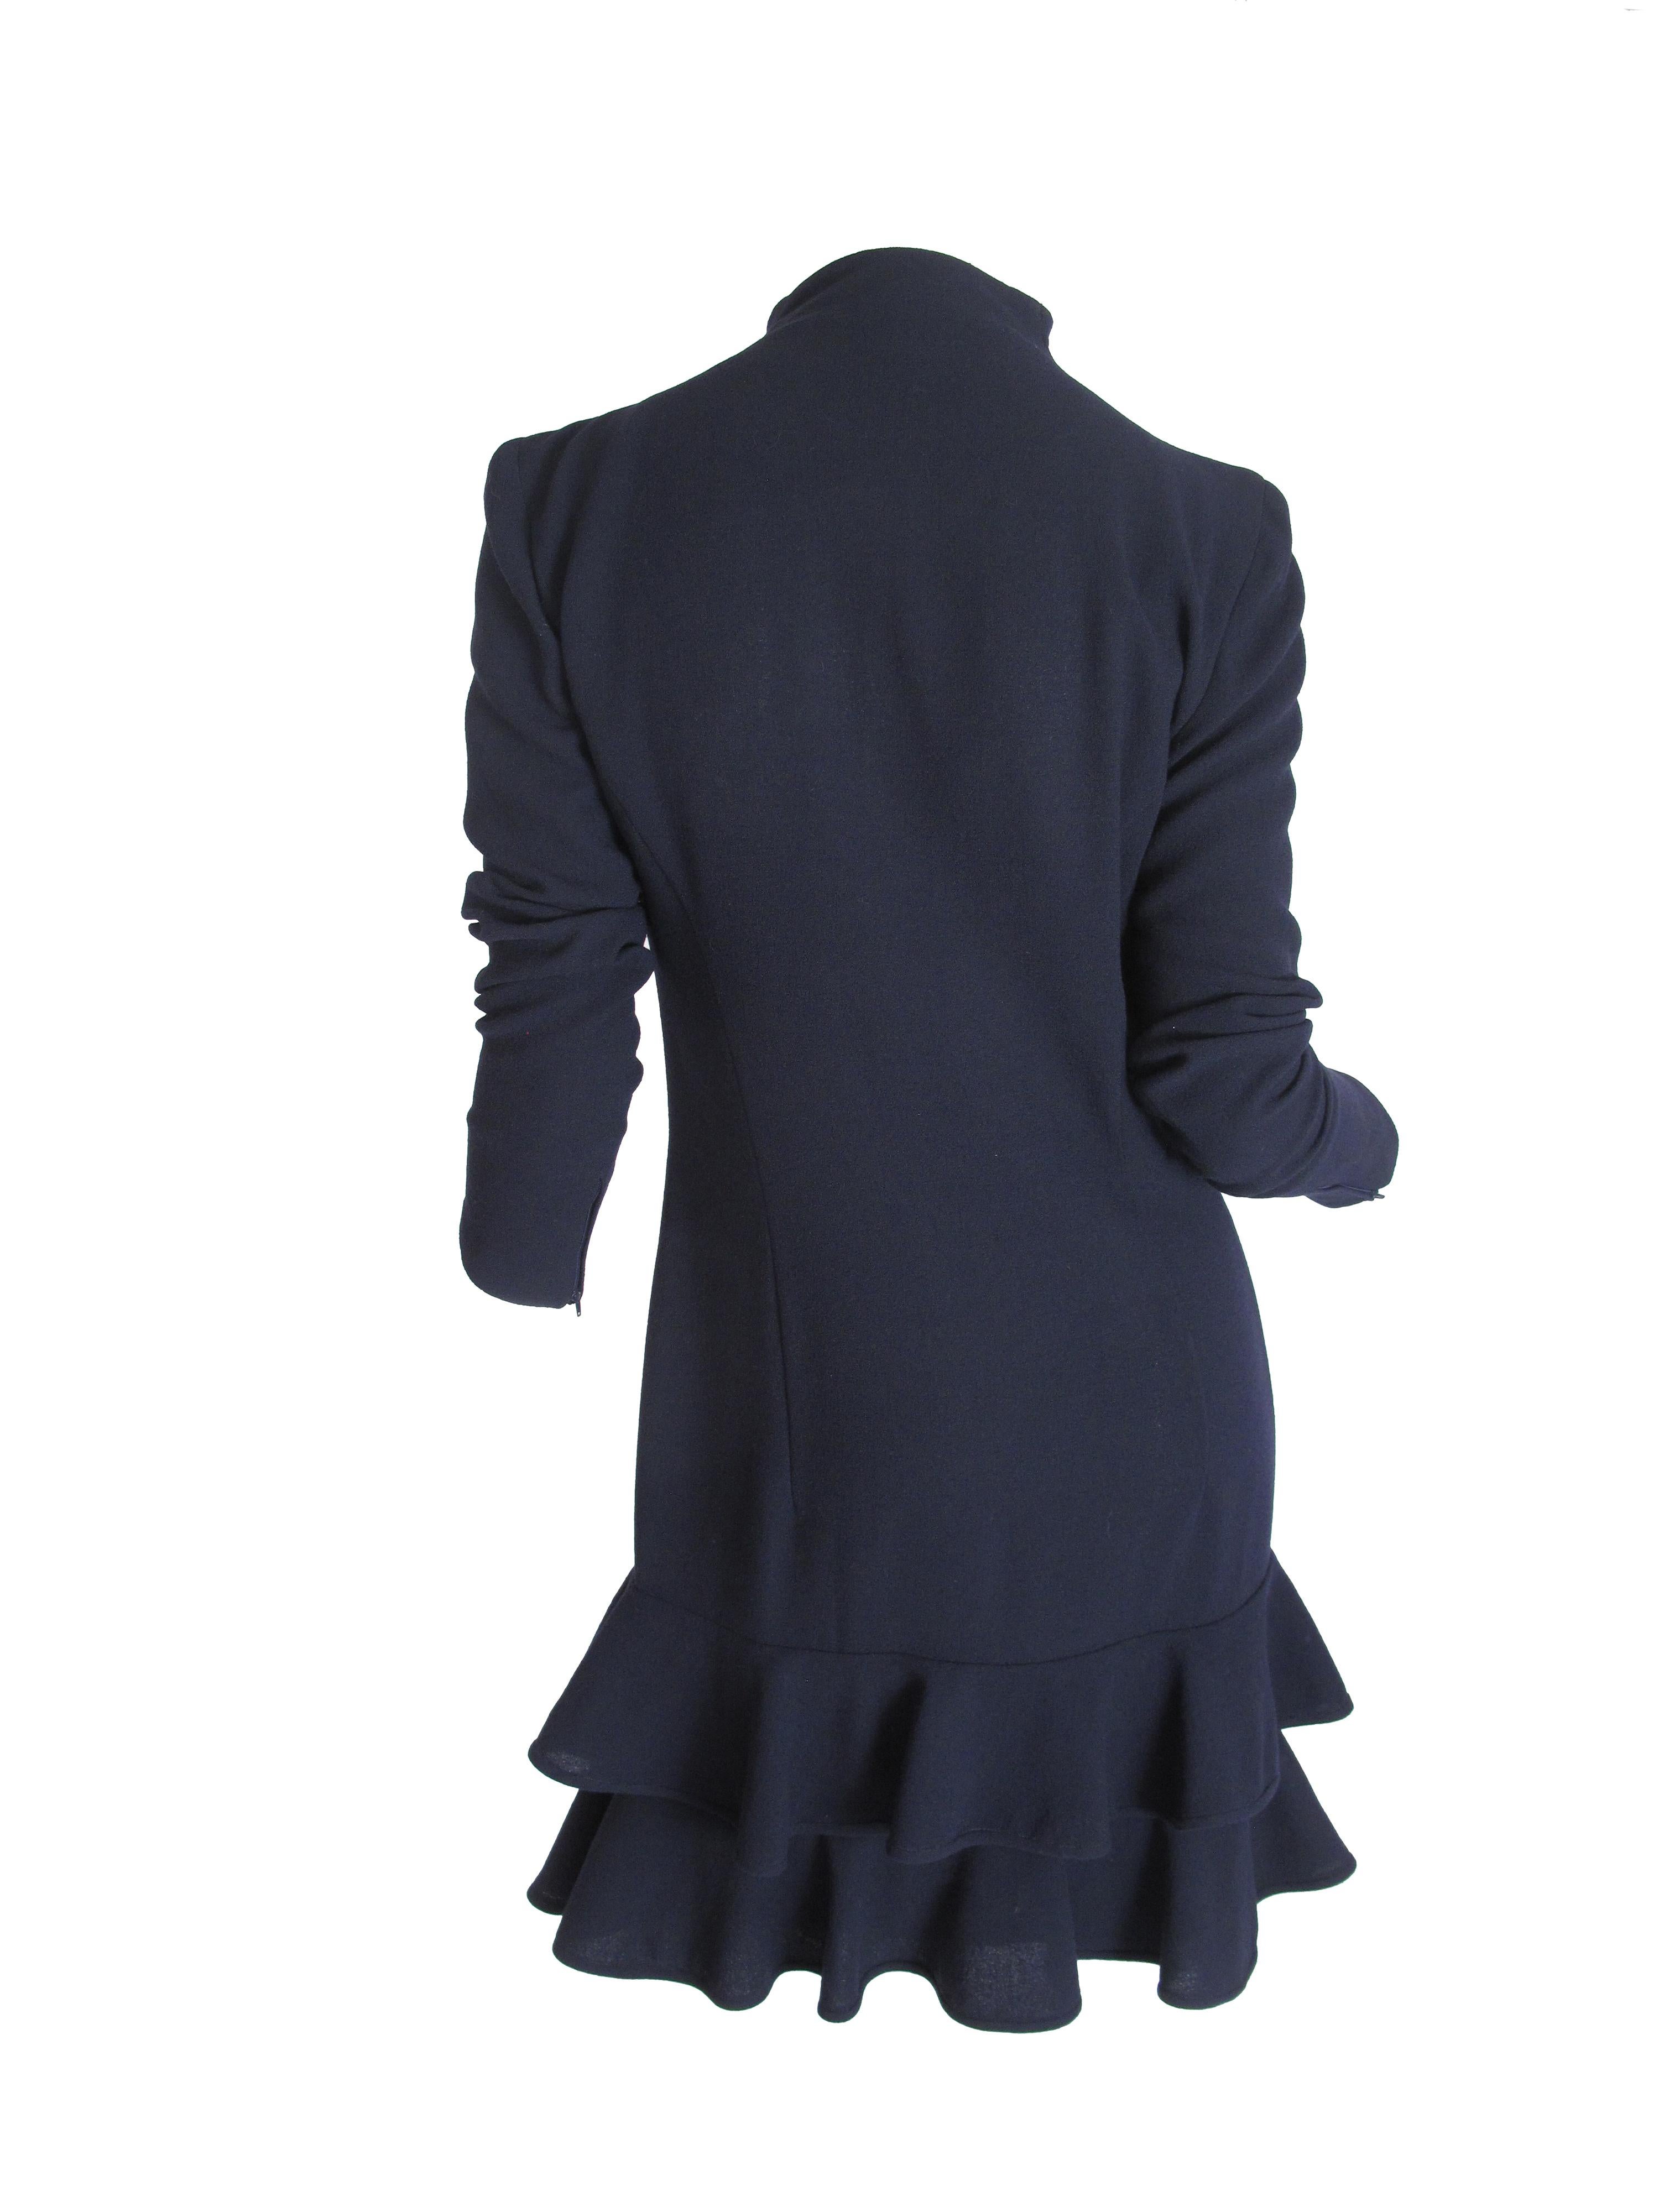 Valentino navy wool dress with zipper front and ruffles at hem. Condition: Very good. Size 8